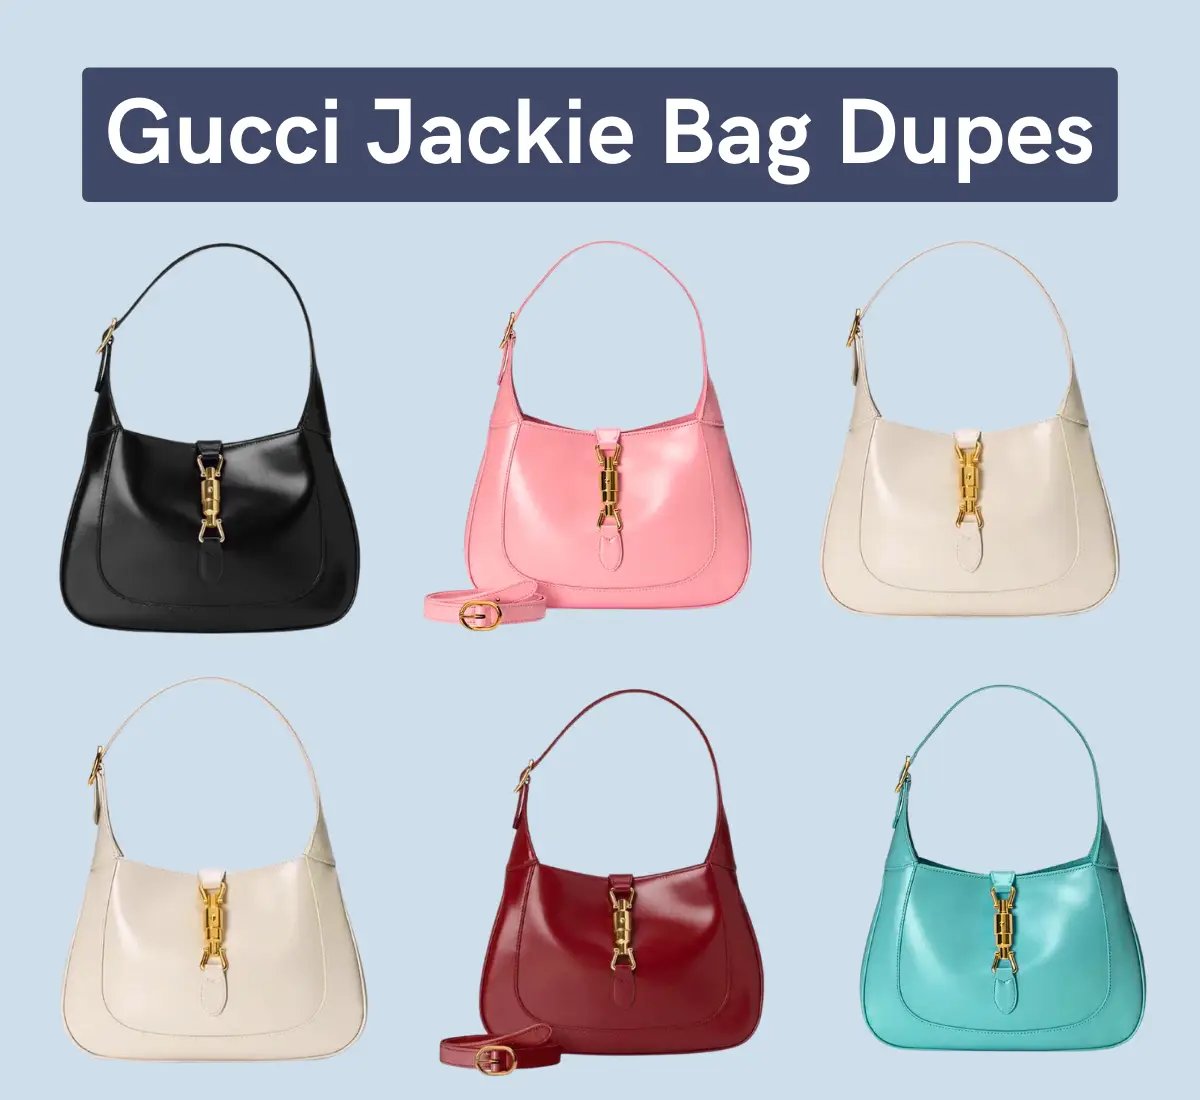 Gucci jackie bag dupe